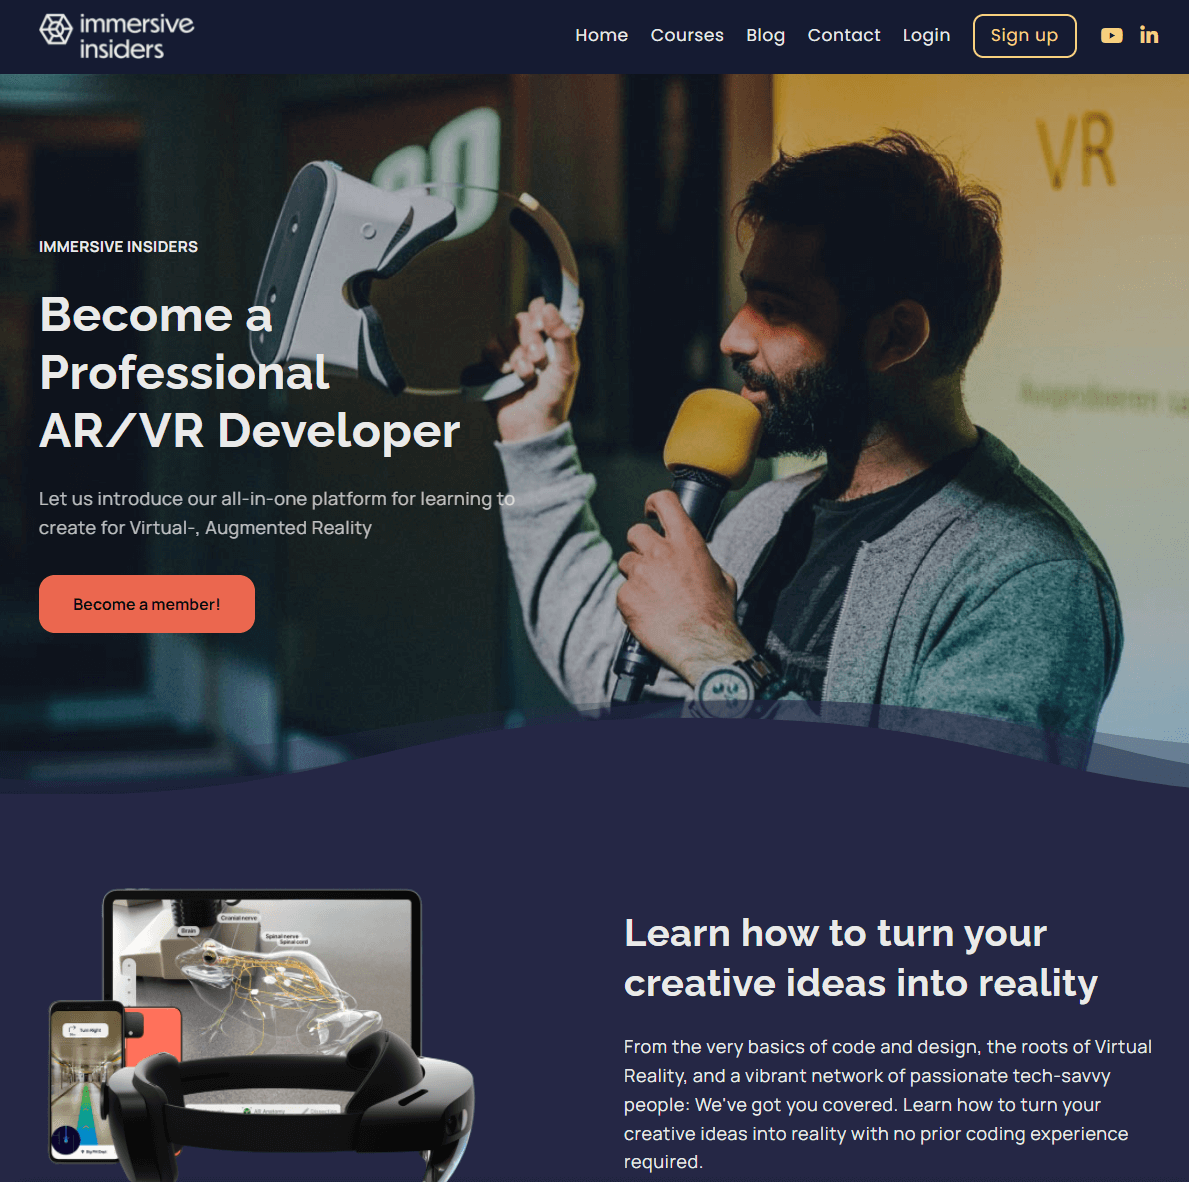 A screenshot of the teaching website Immersive Insiders offering courses in AR / VR development.